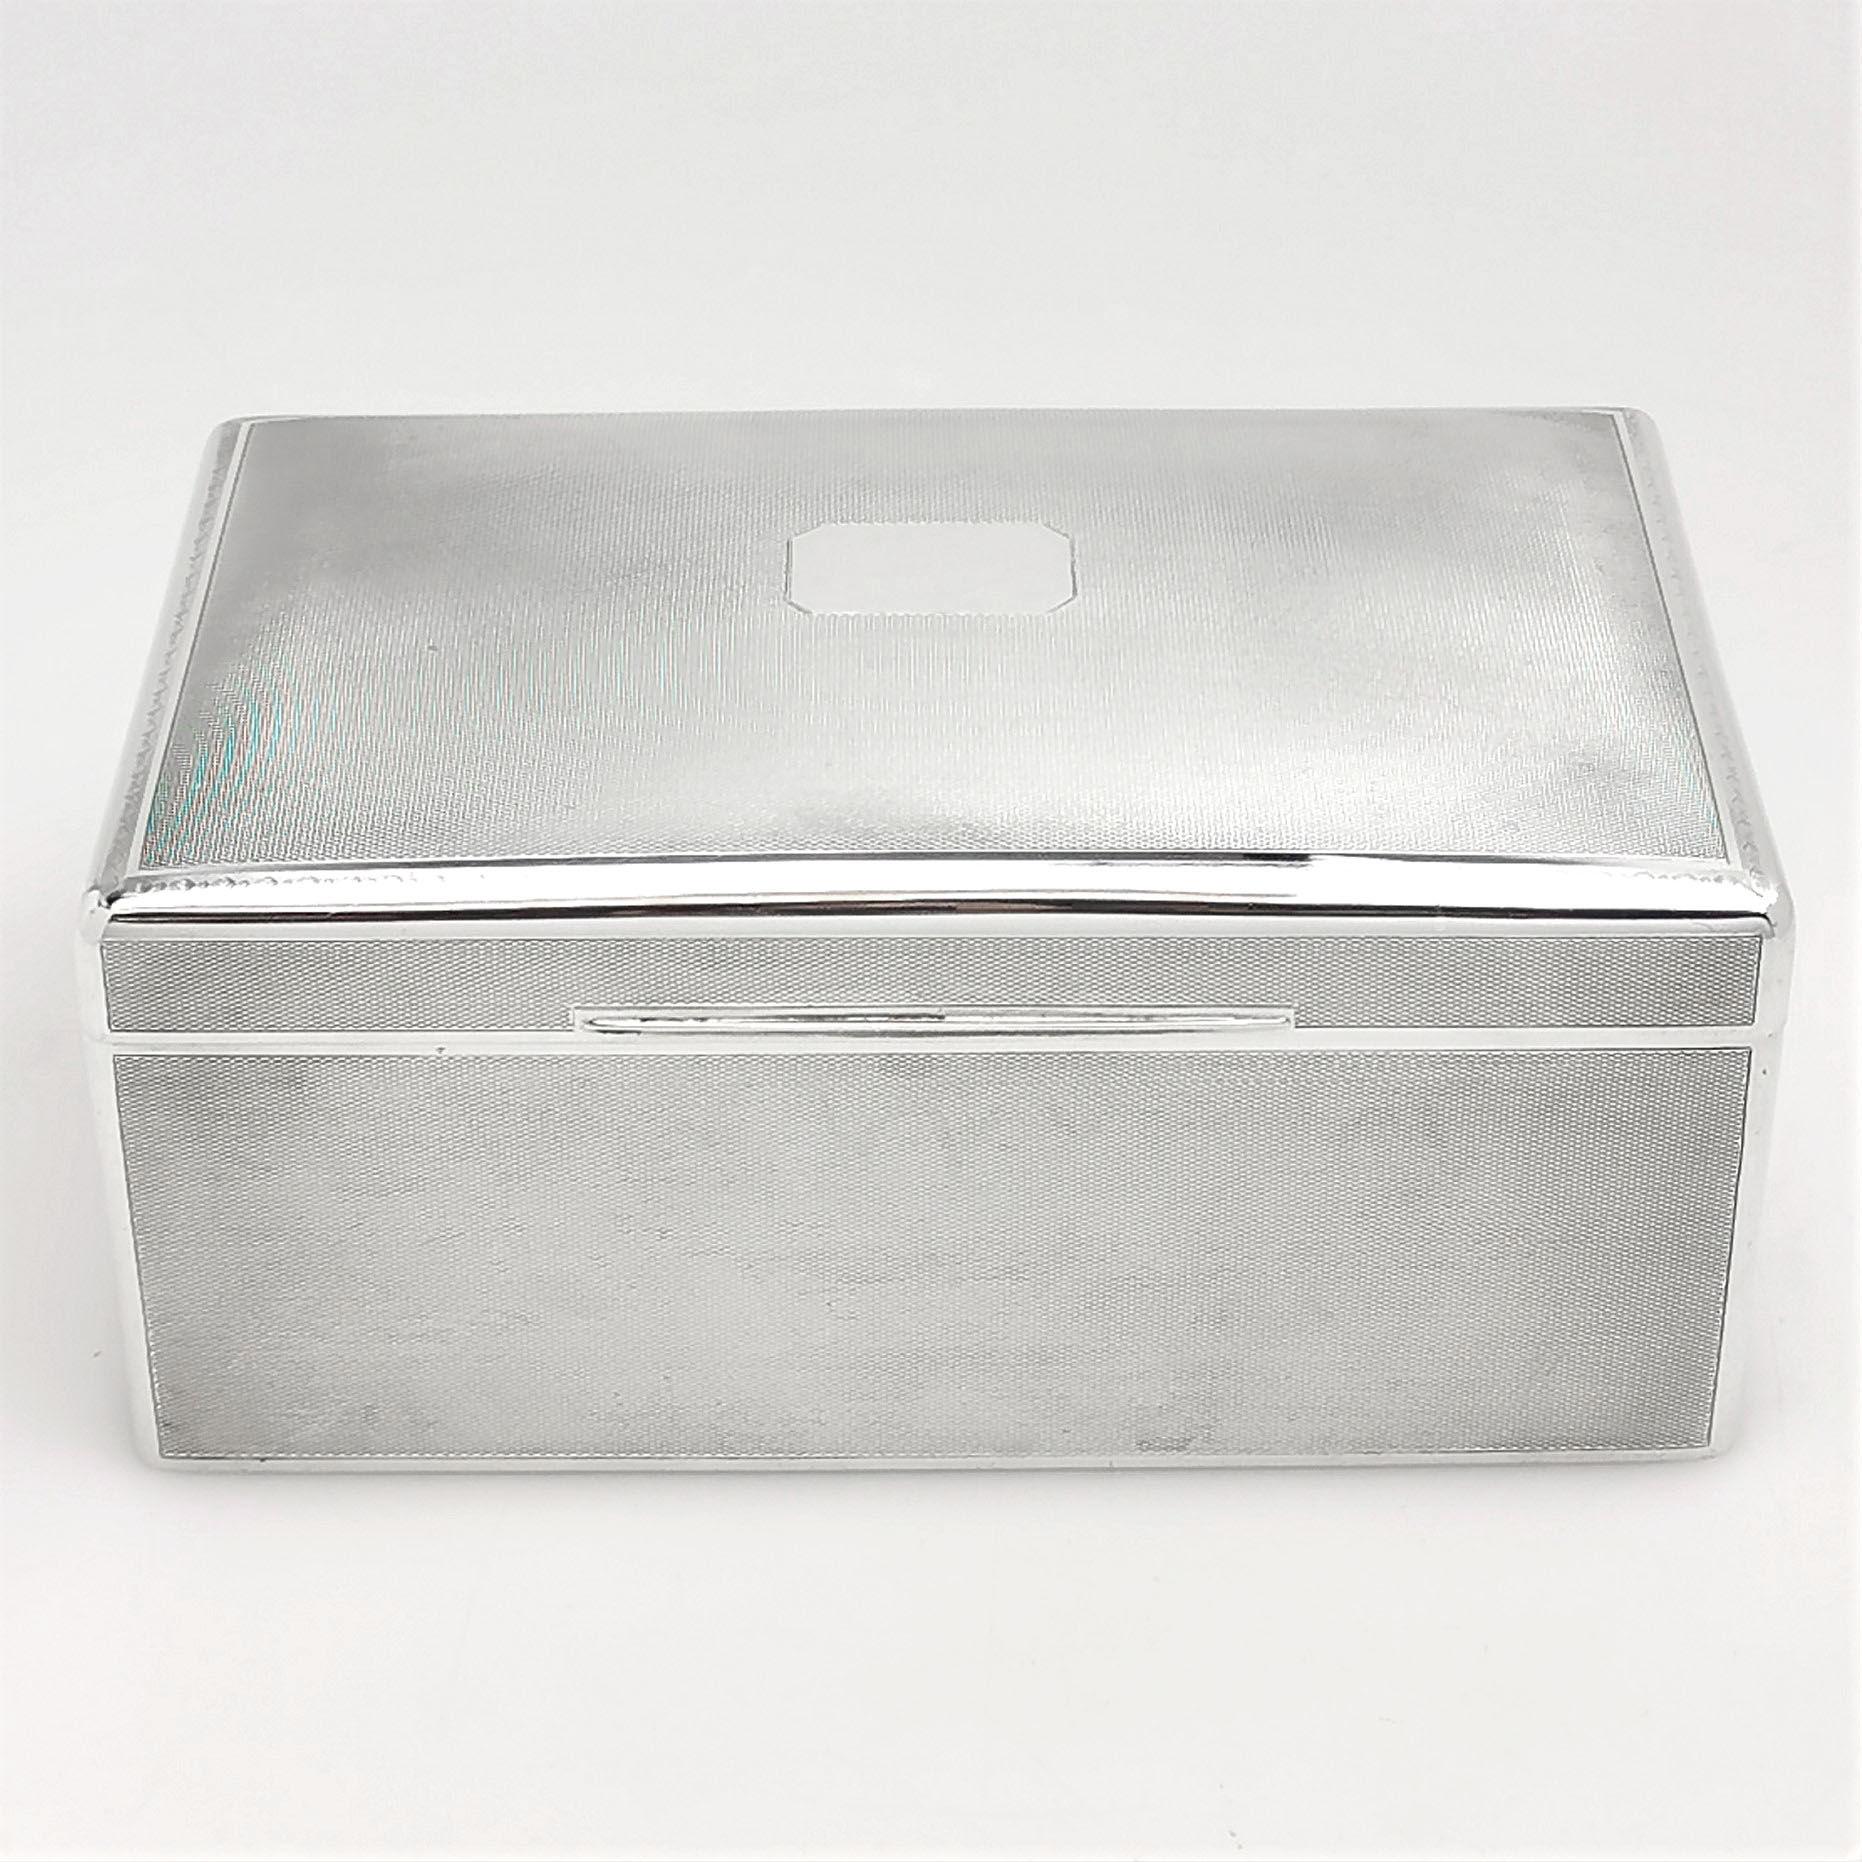 An antique solid silver cigar box / cigarette box with a classic engine turned pattern exterior. The box has a lightly fitted hinged lid with a blank cartouche in the centre to allow for engraving if desired. The interior of the base of the Box is